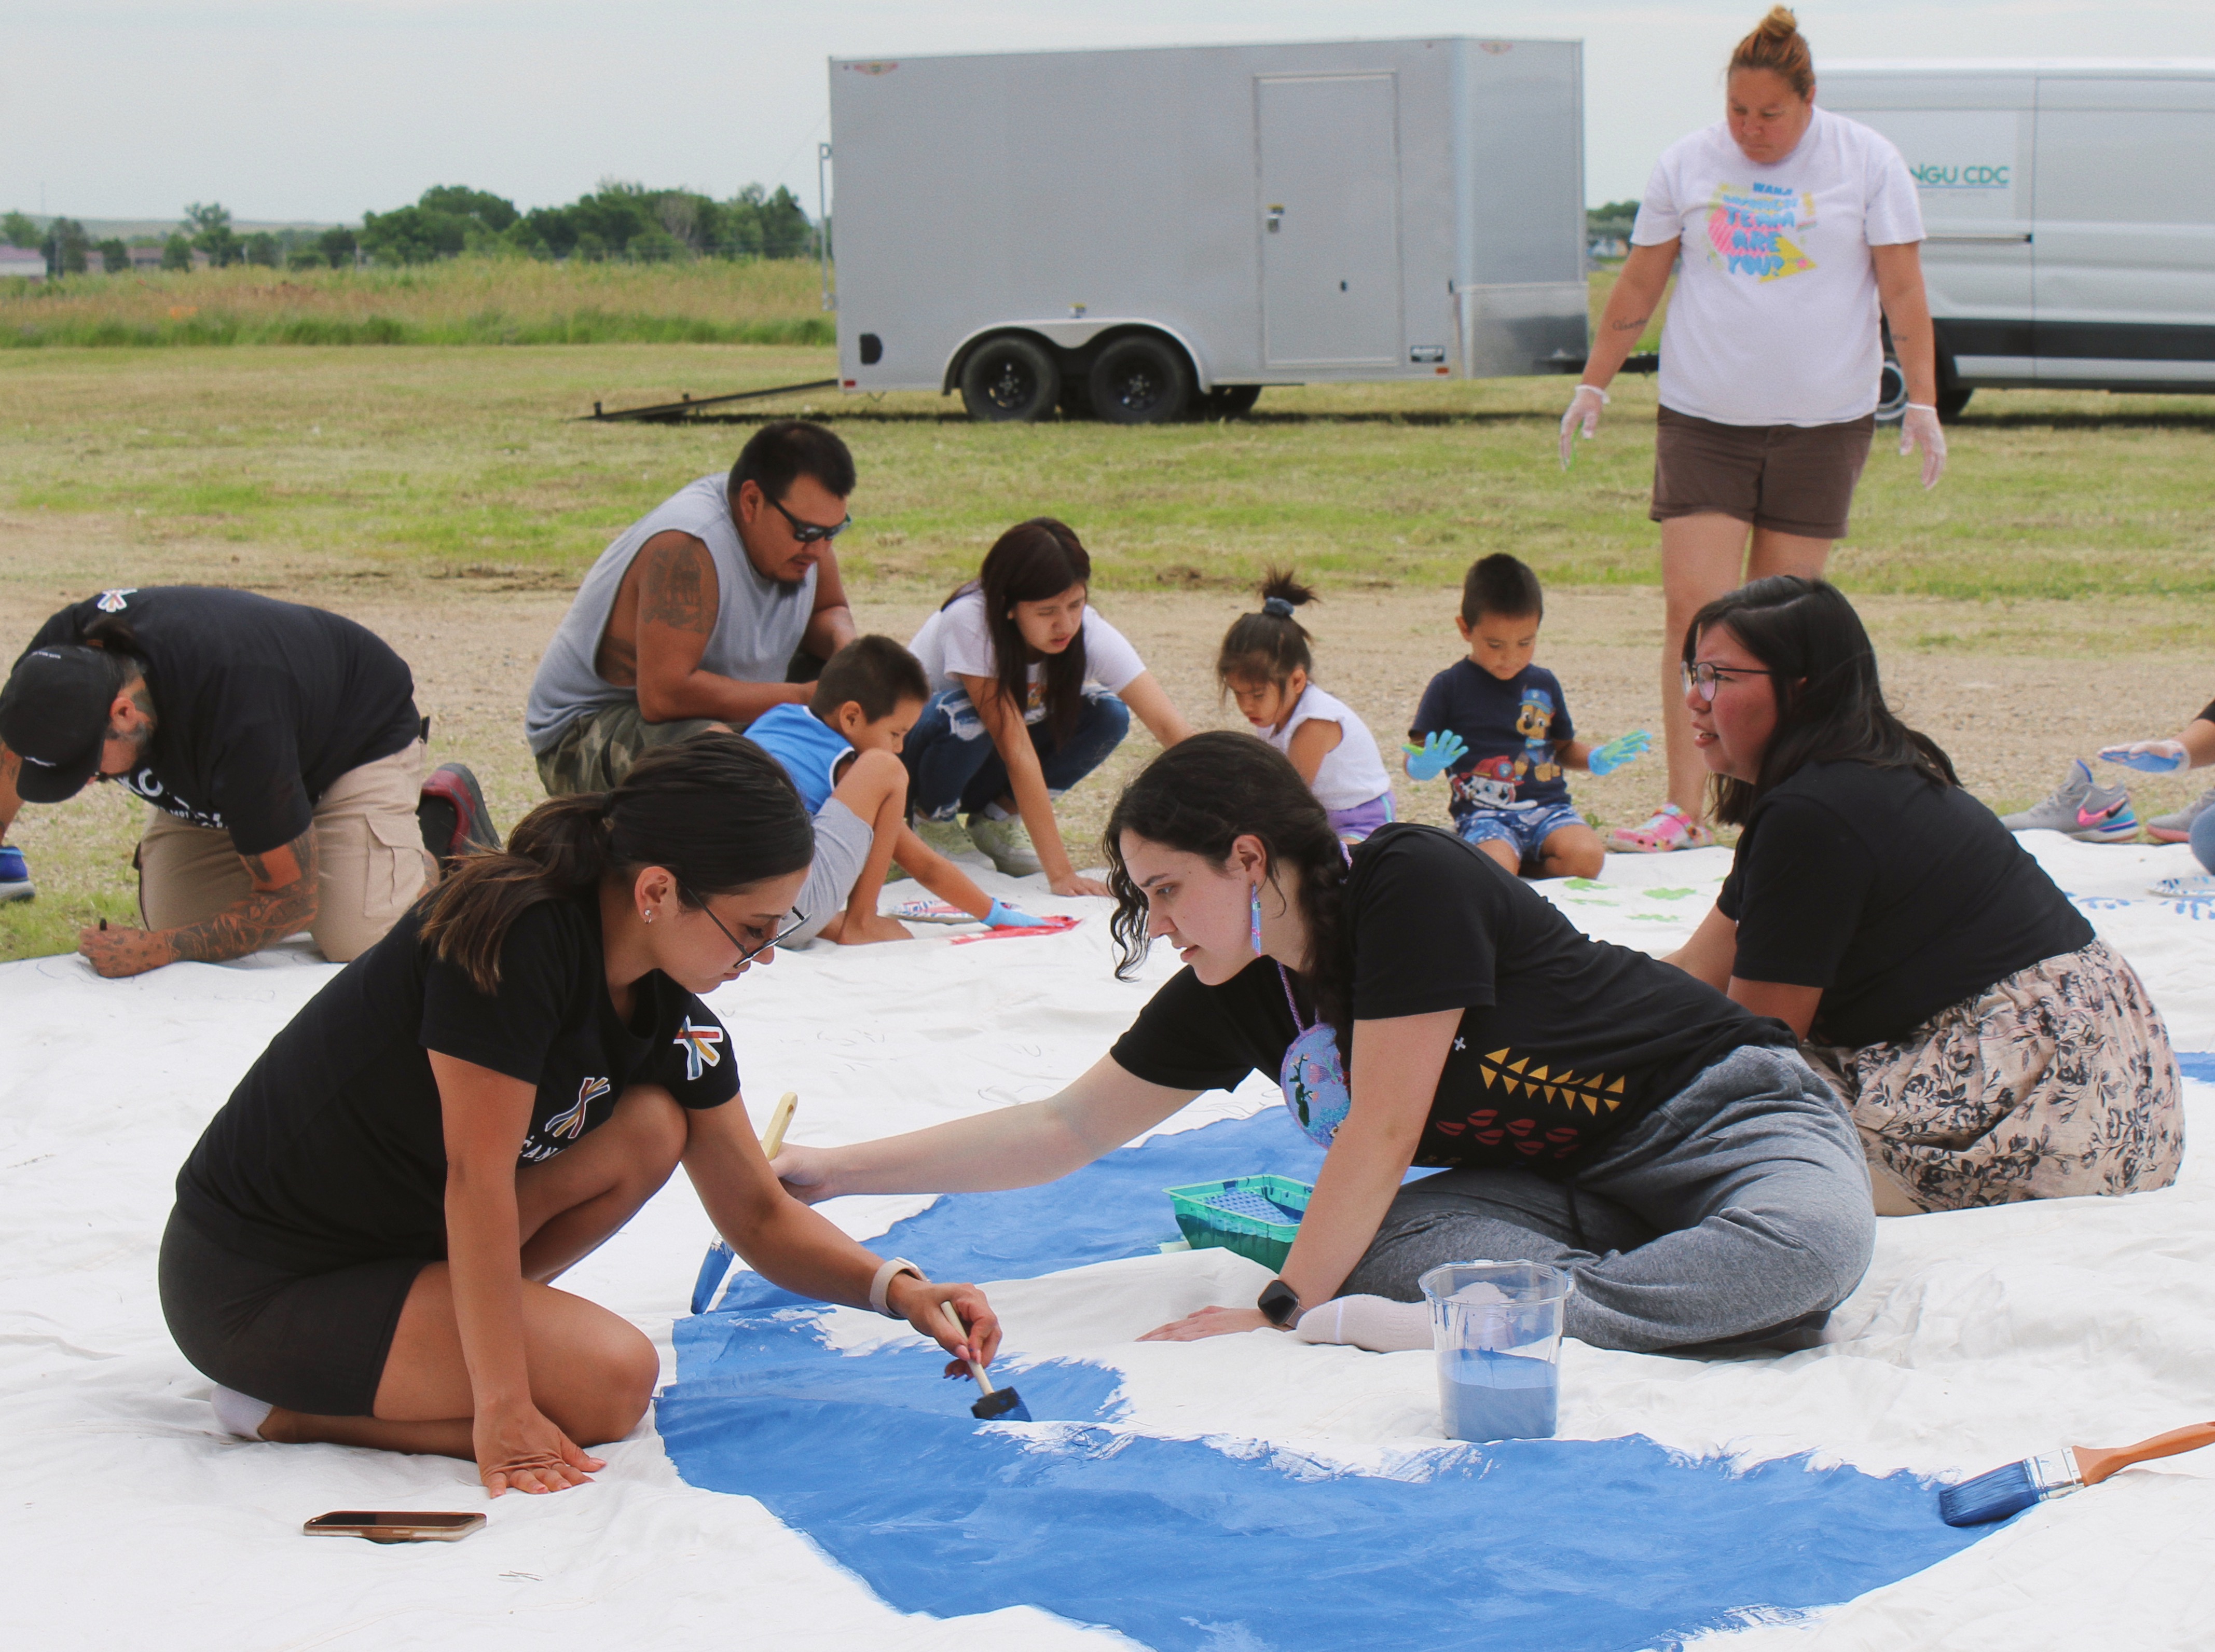 Young people sit on the ground painting together on a large shared canvas